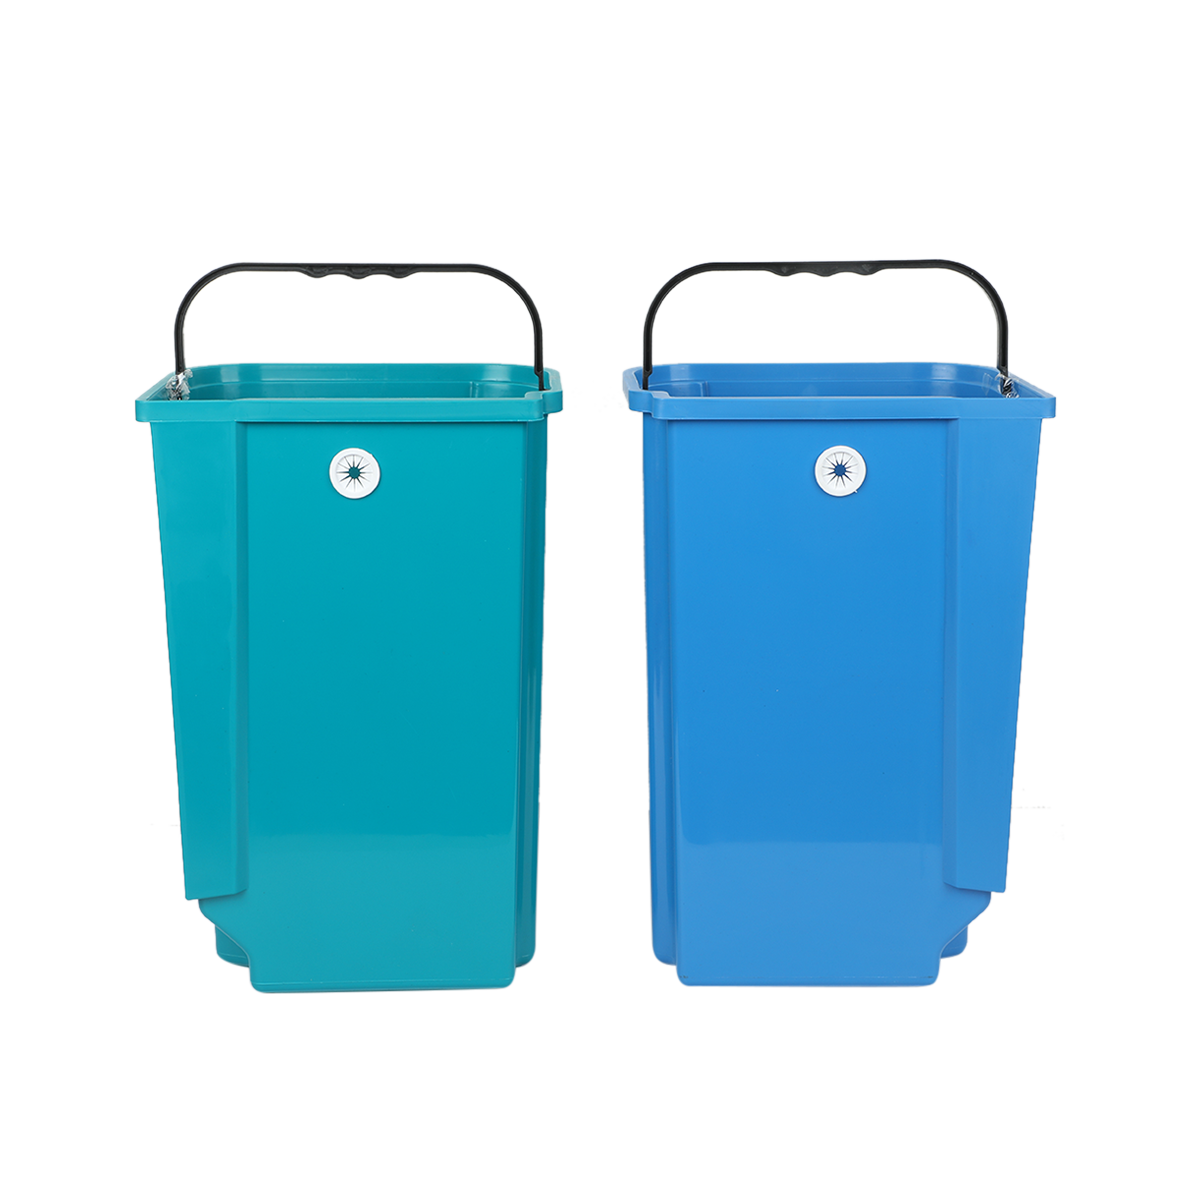 Nayasa 2 In 1 Dustbin - Dry Waste and Wet Waste Step-On Dustbin (33 Ltrs) -  Big, Plastic, Green & Blue : Amazon.in: Home & Kitchen